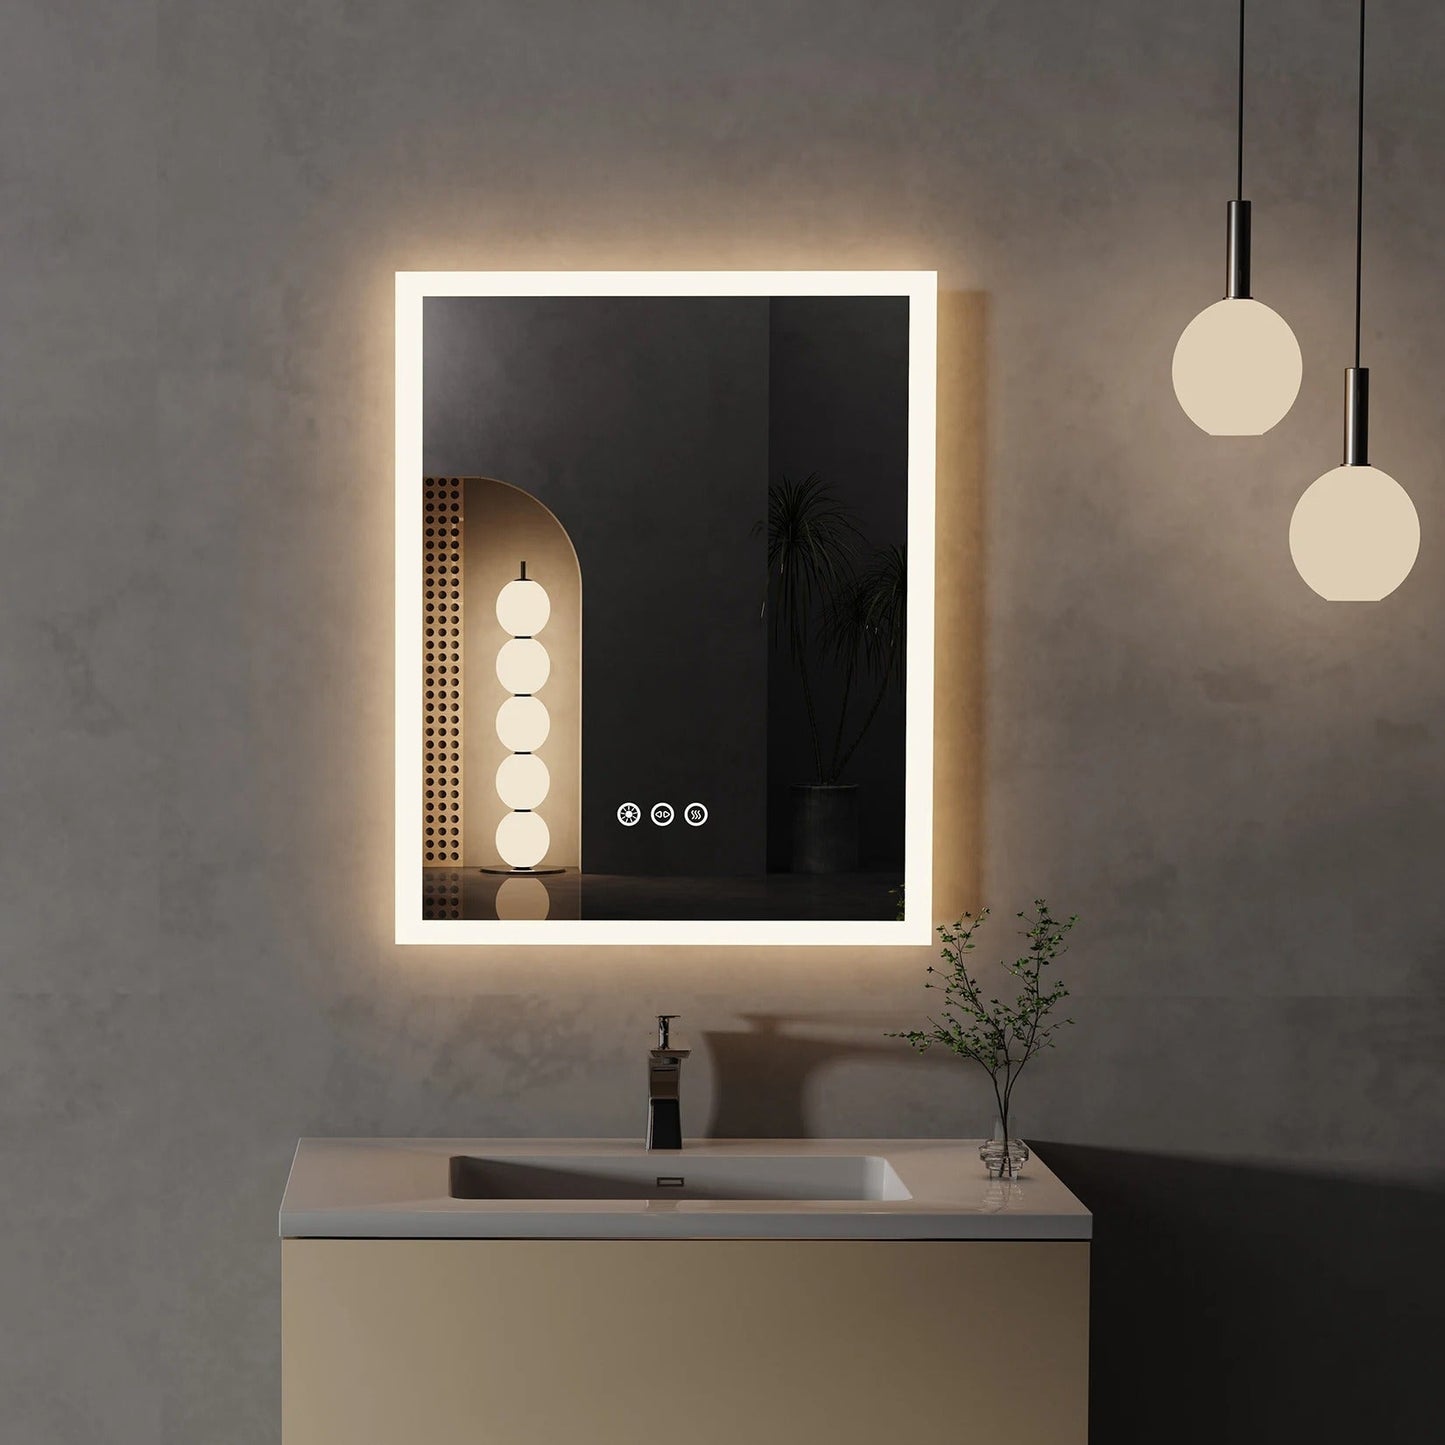 40x50cm Front light LED Bathroom Mirror with Anti-Fog, Wall Mounted Vanity Mirror with Smart Touch Button, Memory Function